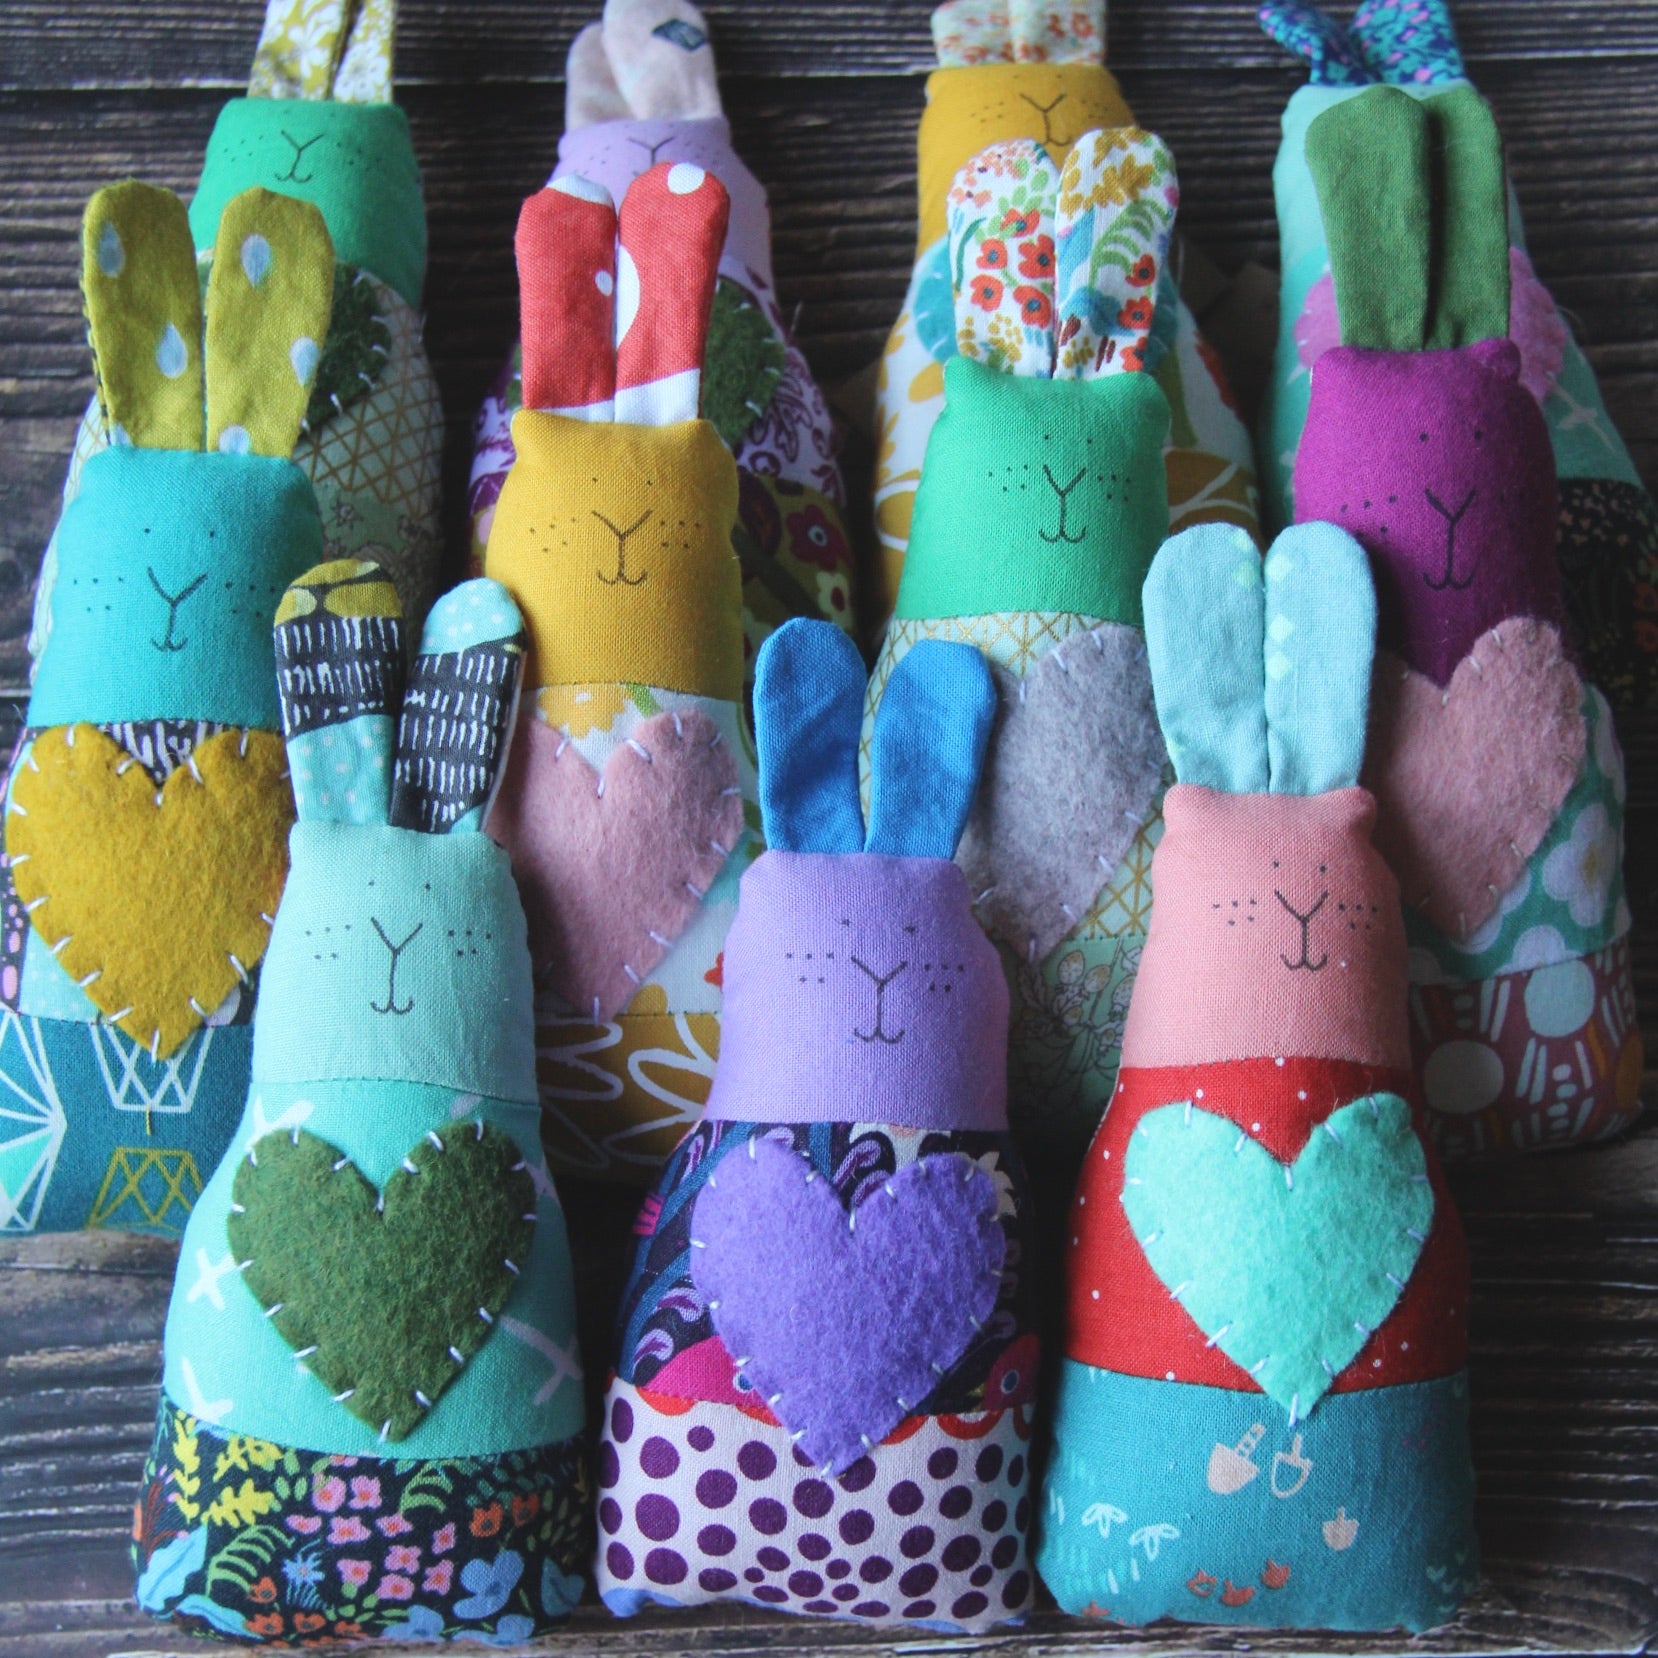 Eleven multicolored handmade fabric bunny rattles are lined up on wooden surface. 